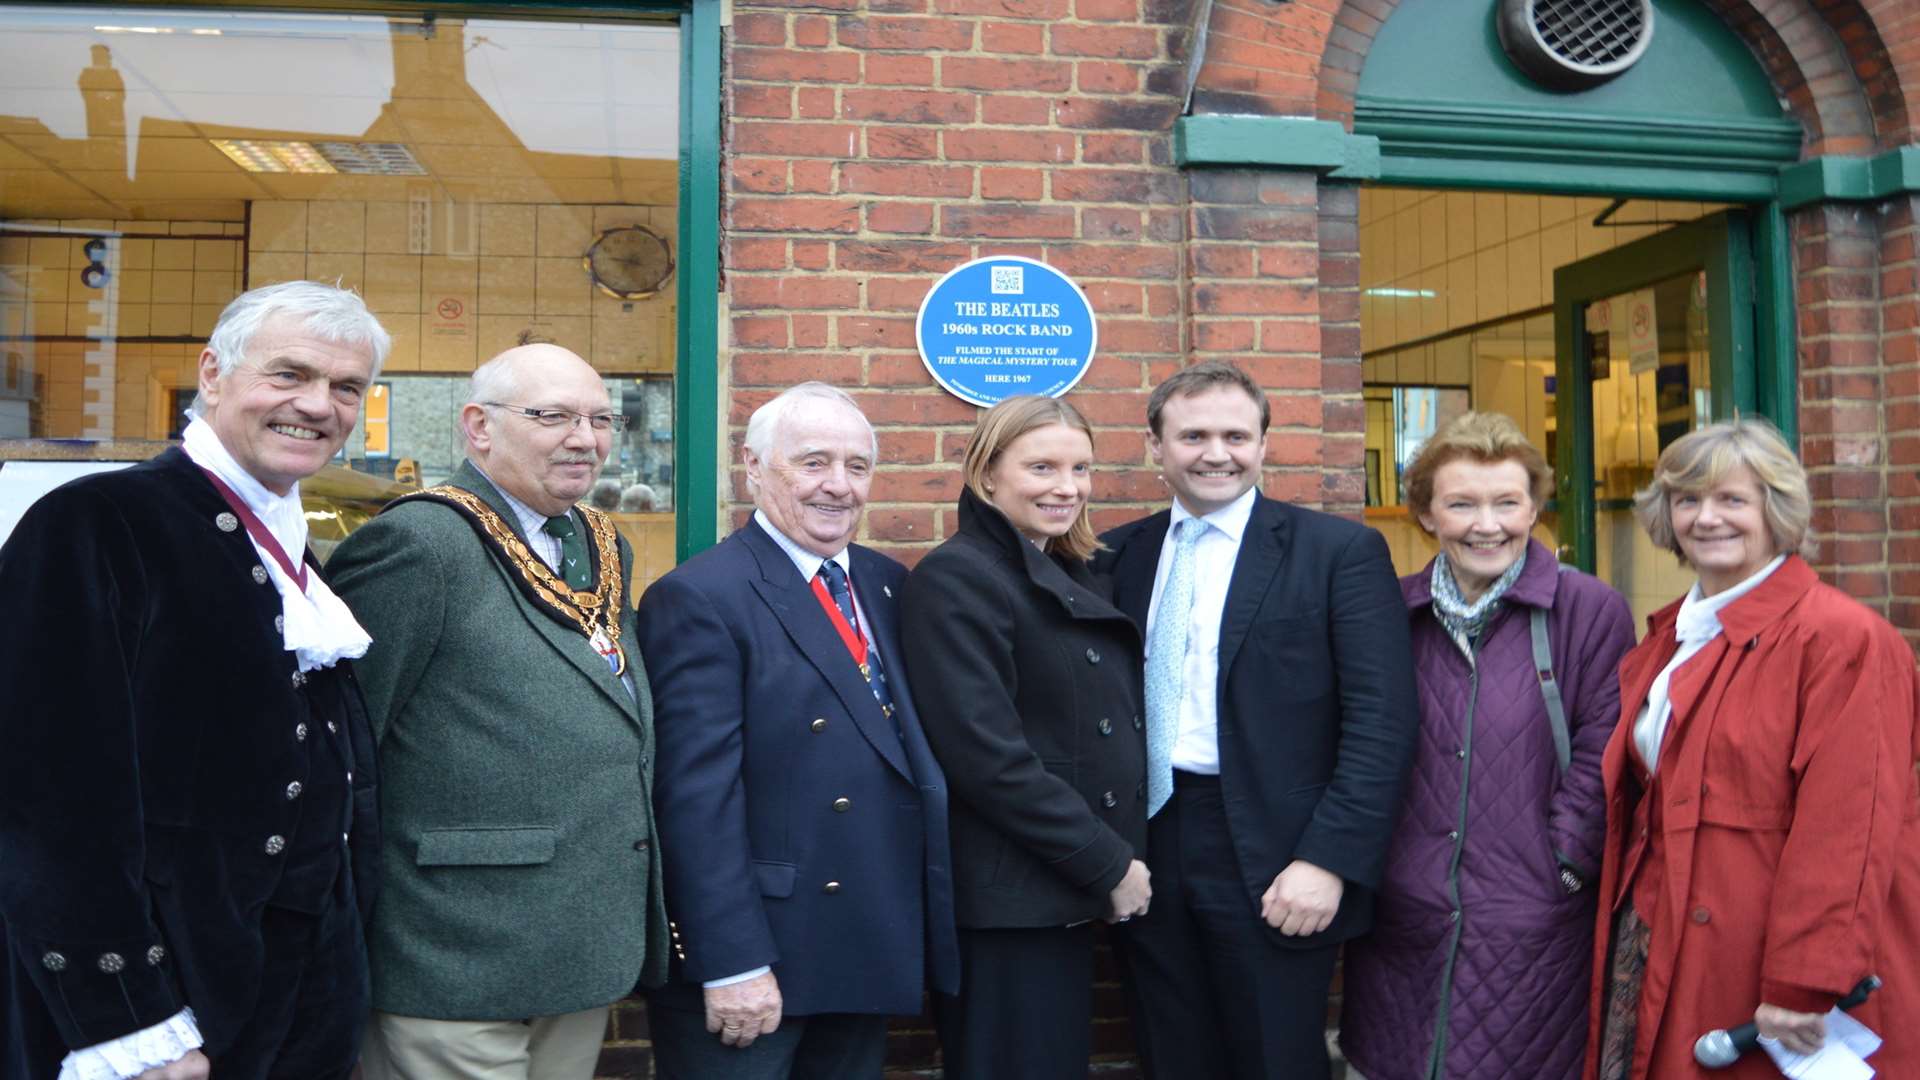 A ceremony was held to mark the unveiling of the plaques